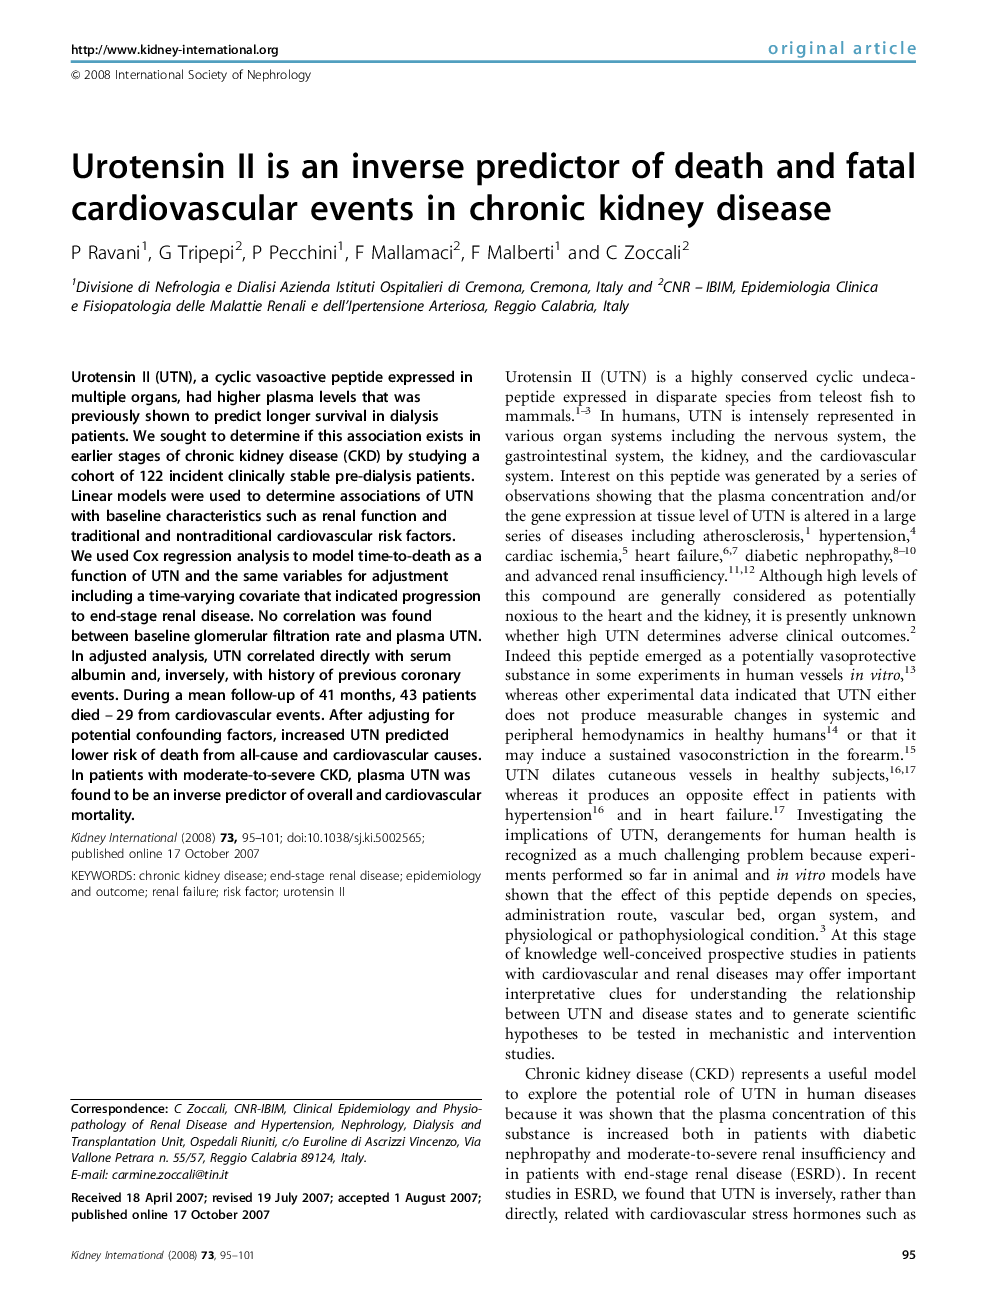 Urotensin II is an inverse predictor of death and fatal cardiovascular events in chronic kidney disease